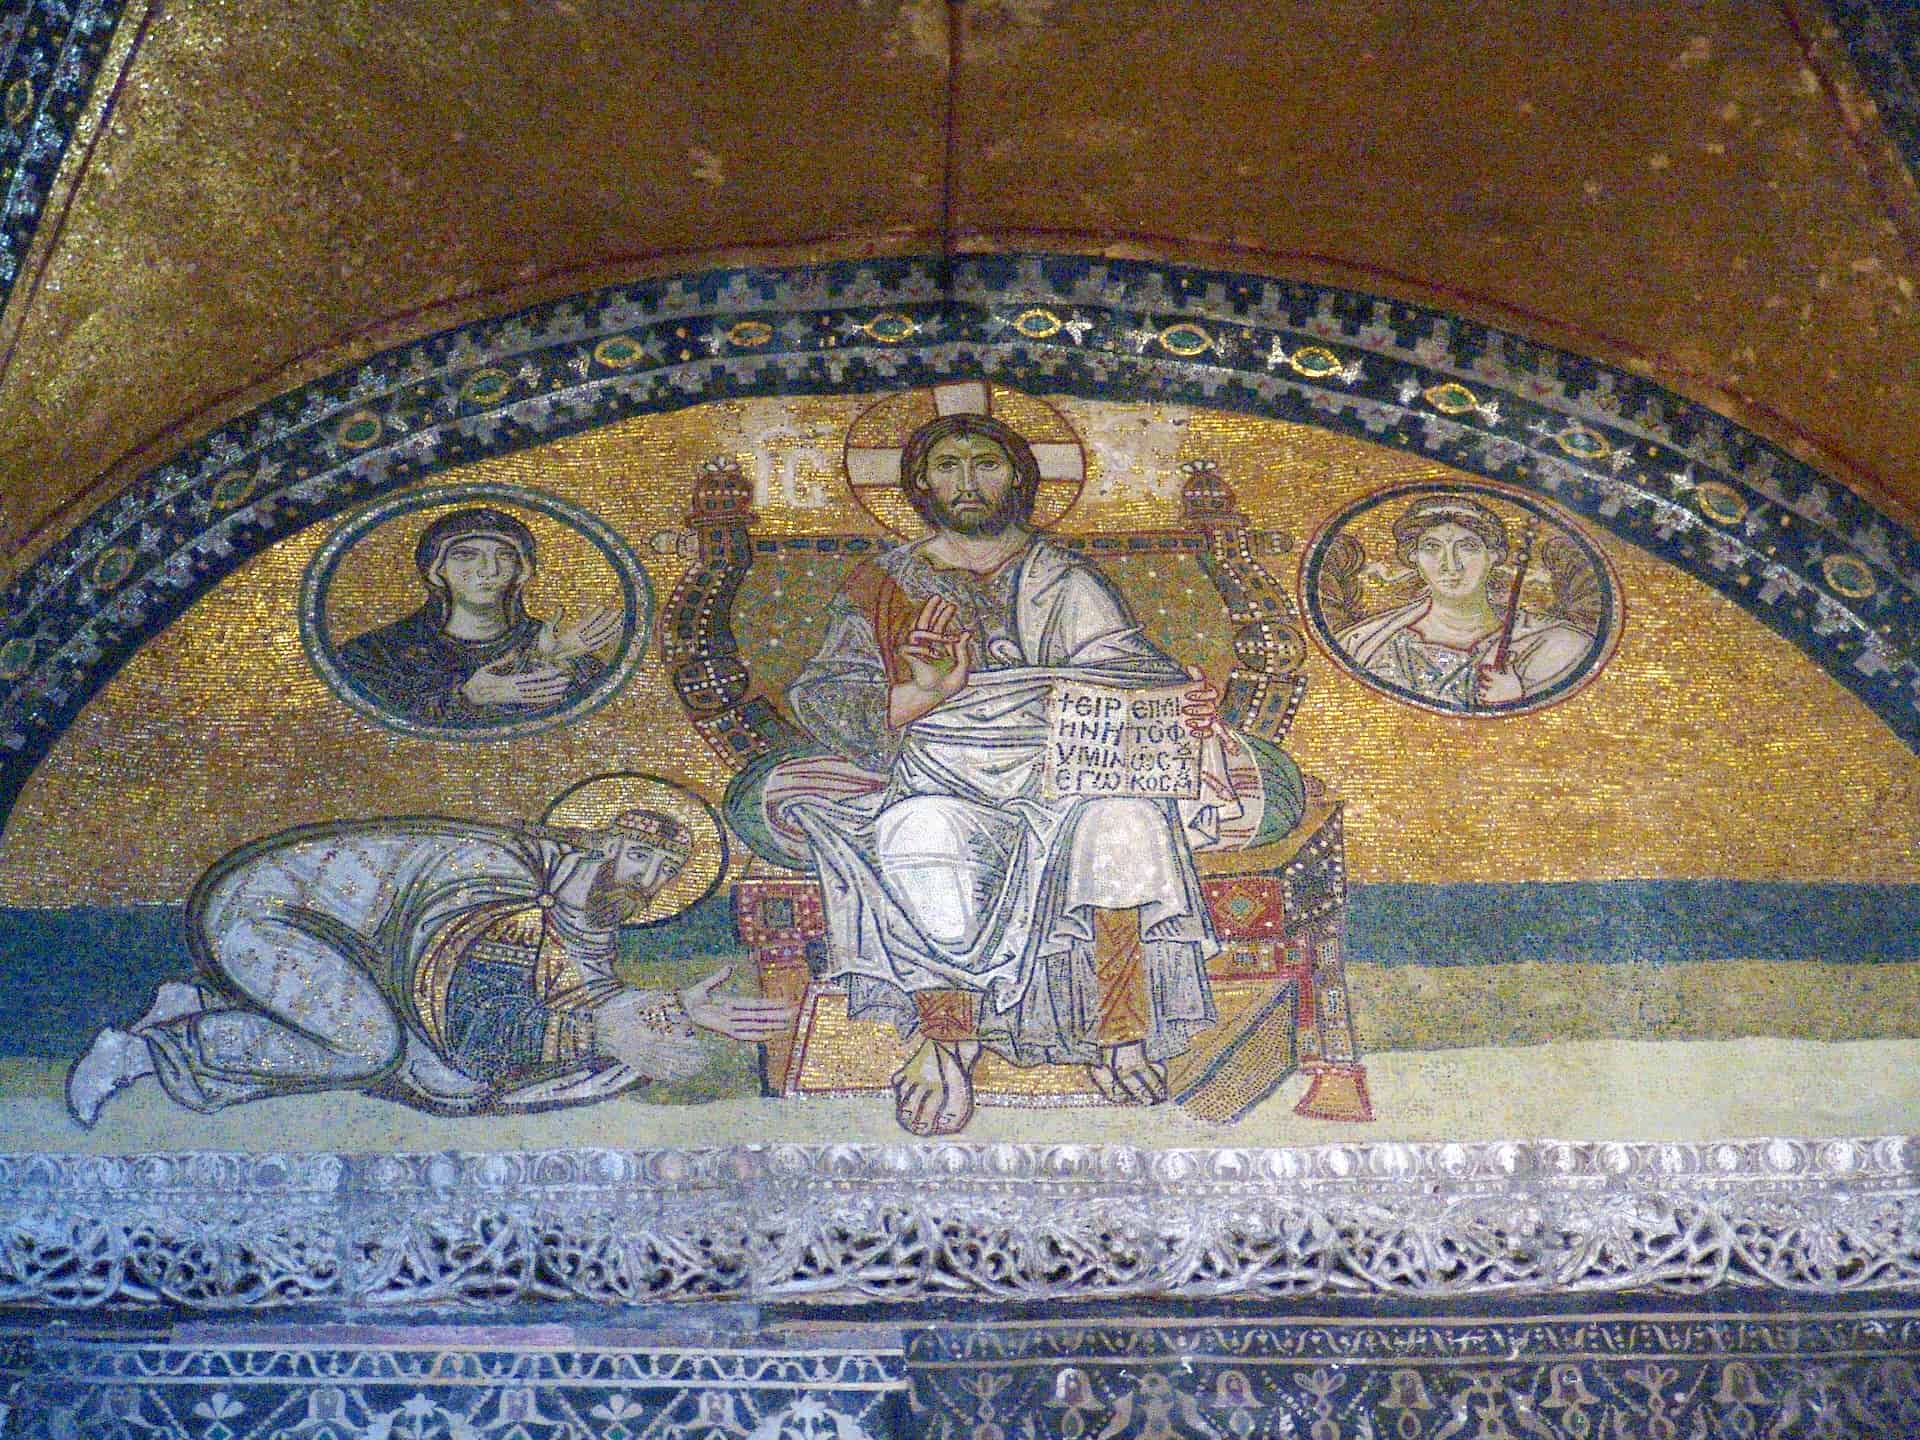 Mosaic of the Imperial Gate at Hagia Sophia in Istanbul, Turkey